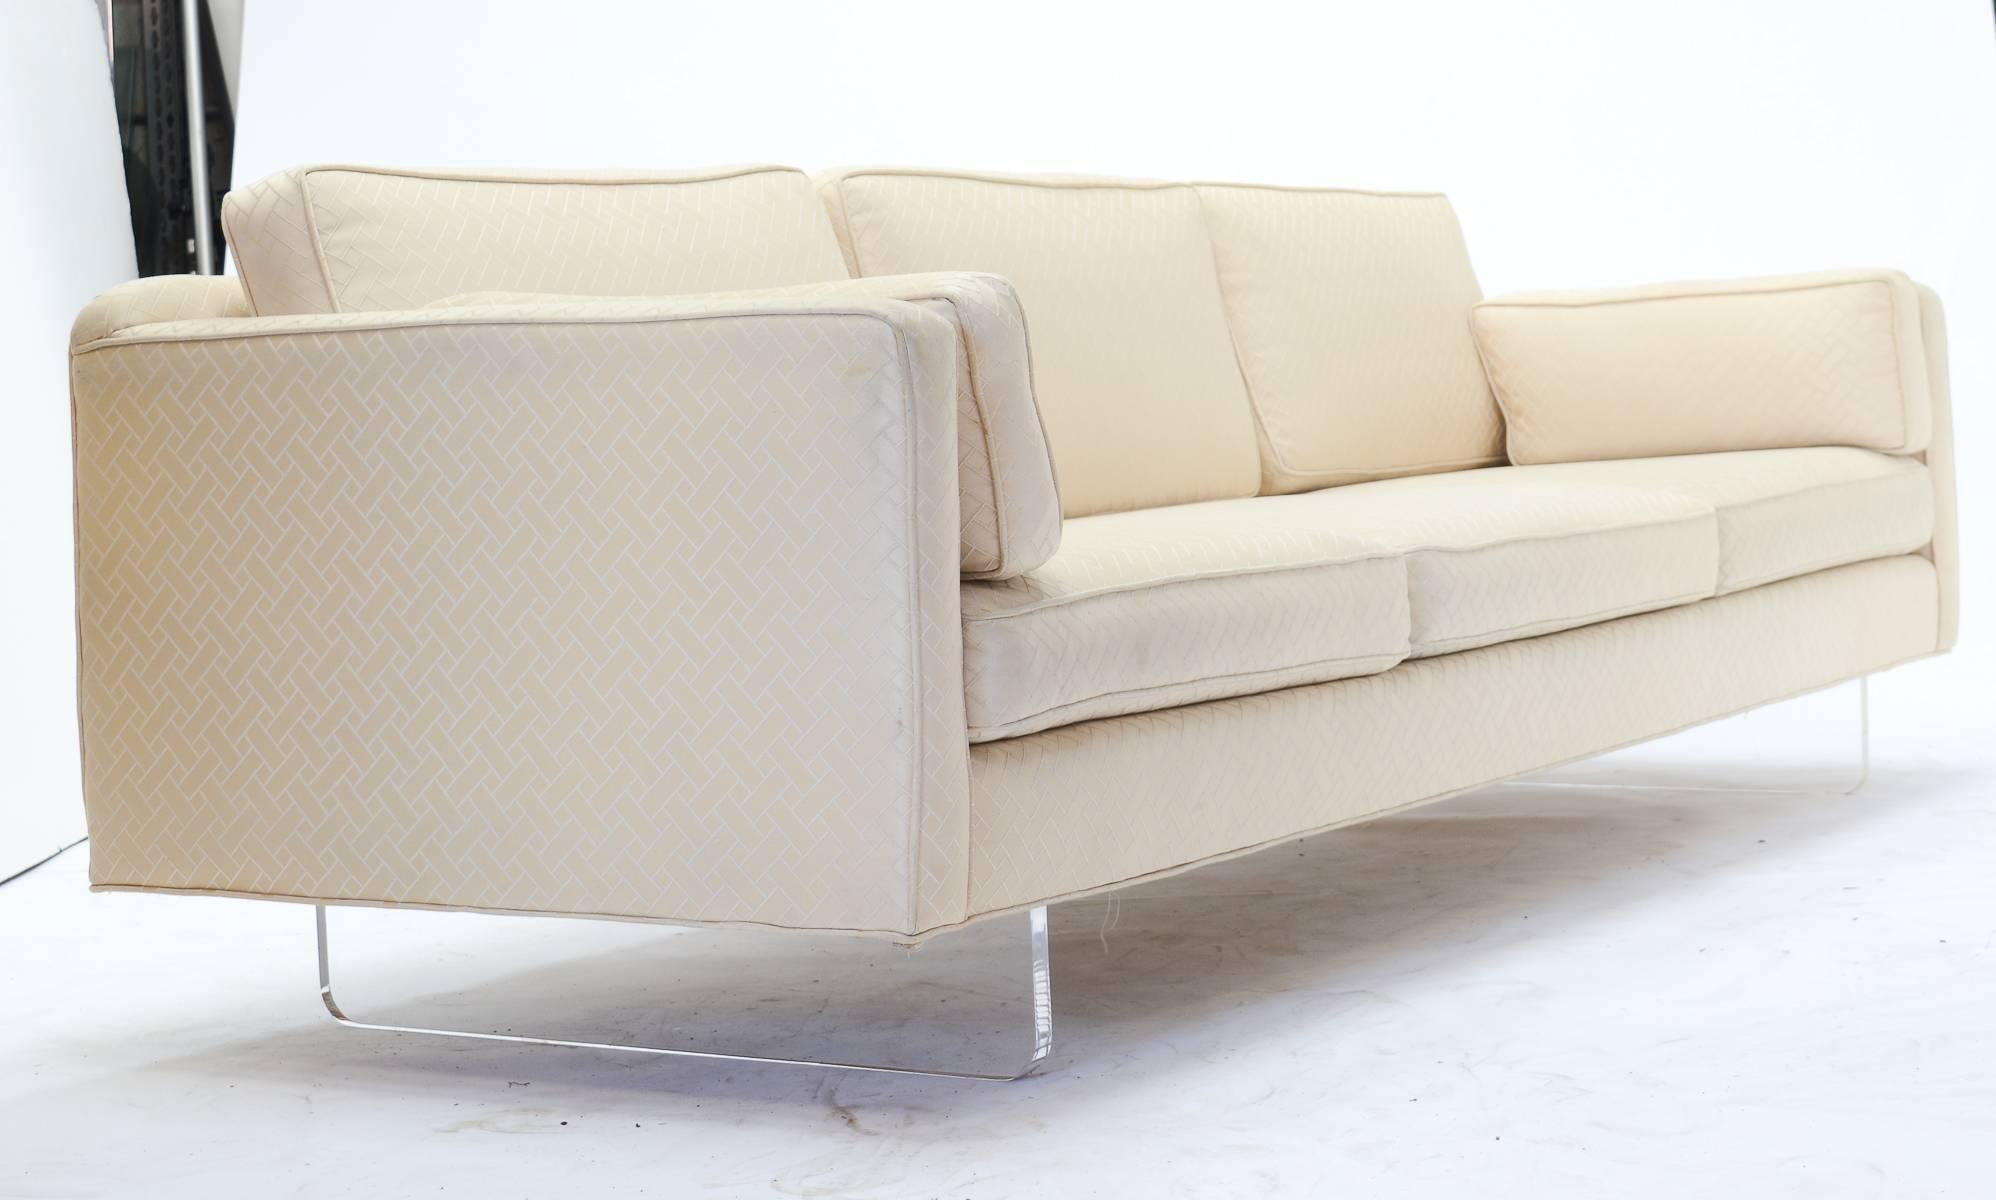 A handsomely tailored sofa with Lucite sled bases in the manner of American artist and furniture designer Charles Hollis Jones (b. 1945).

A fitting tribute to the living American genius, who established his own design firm at age 16, initiating and